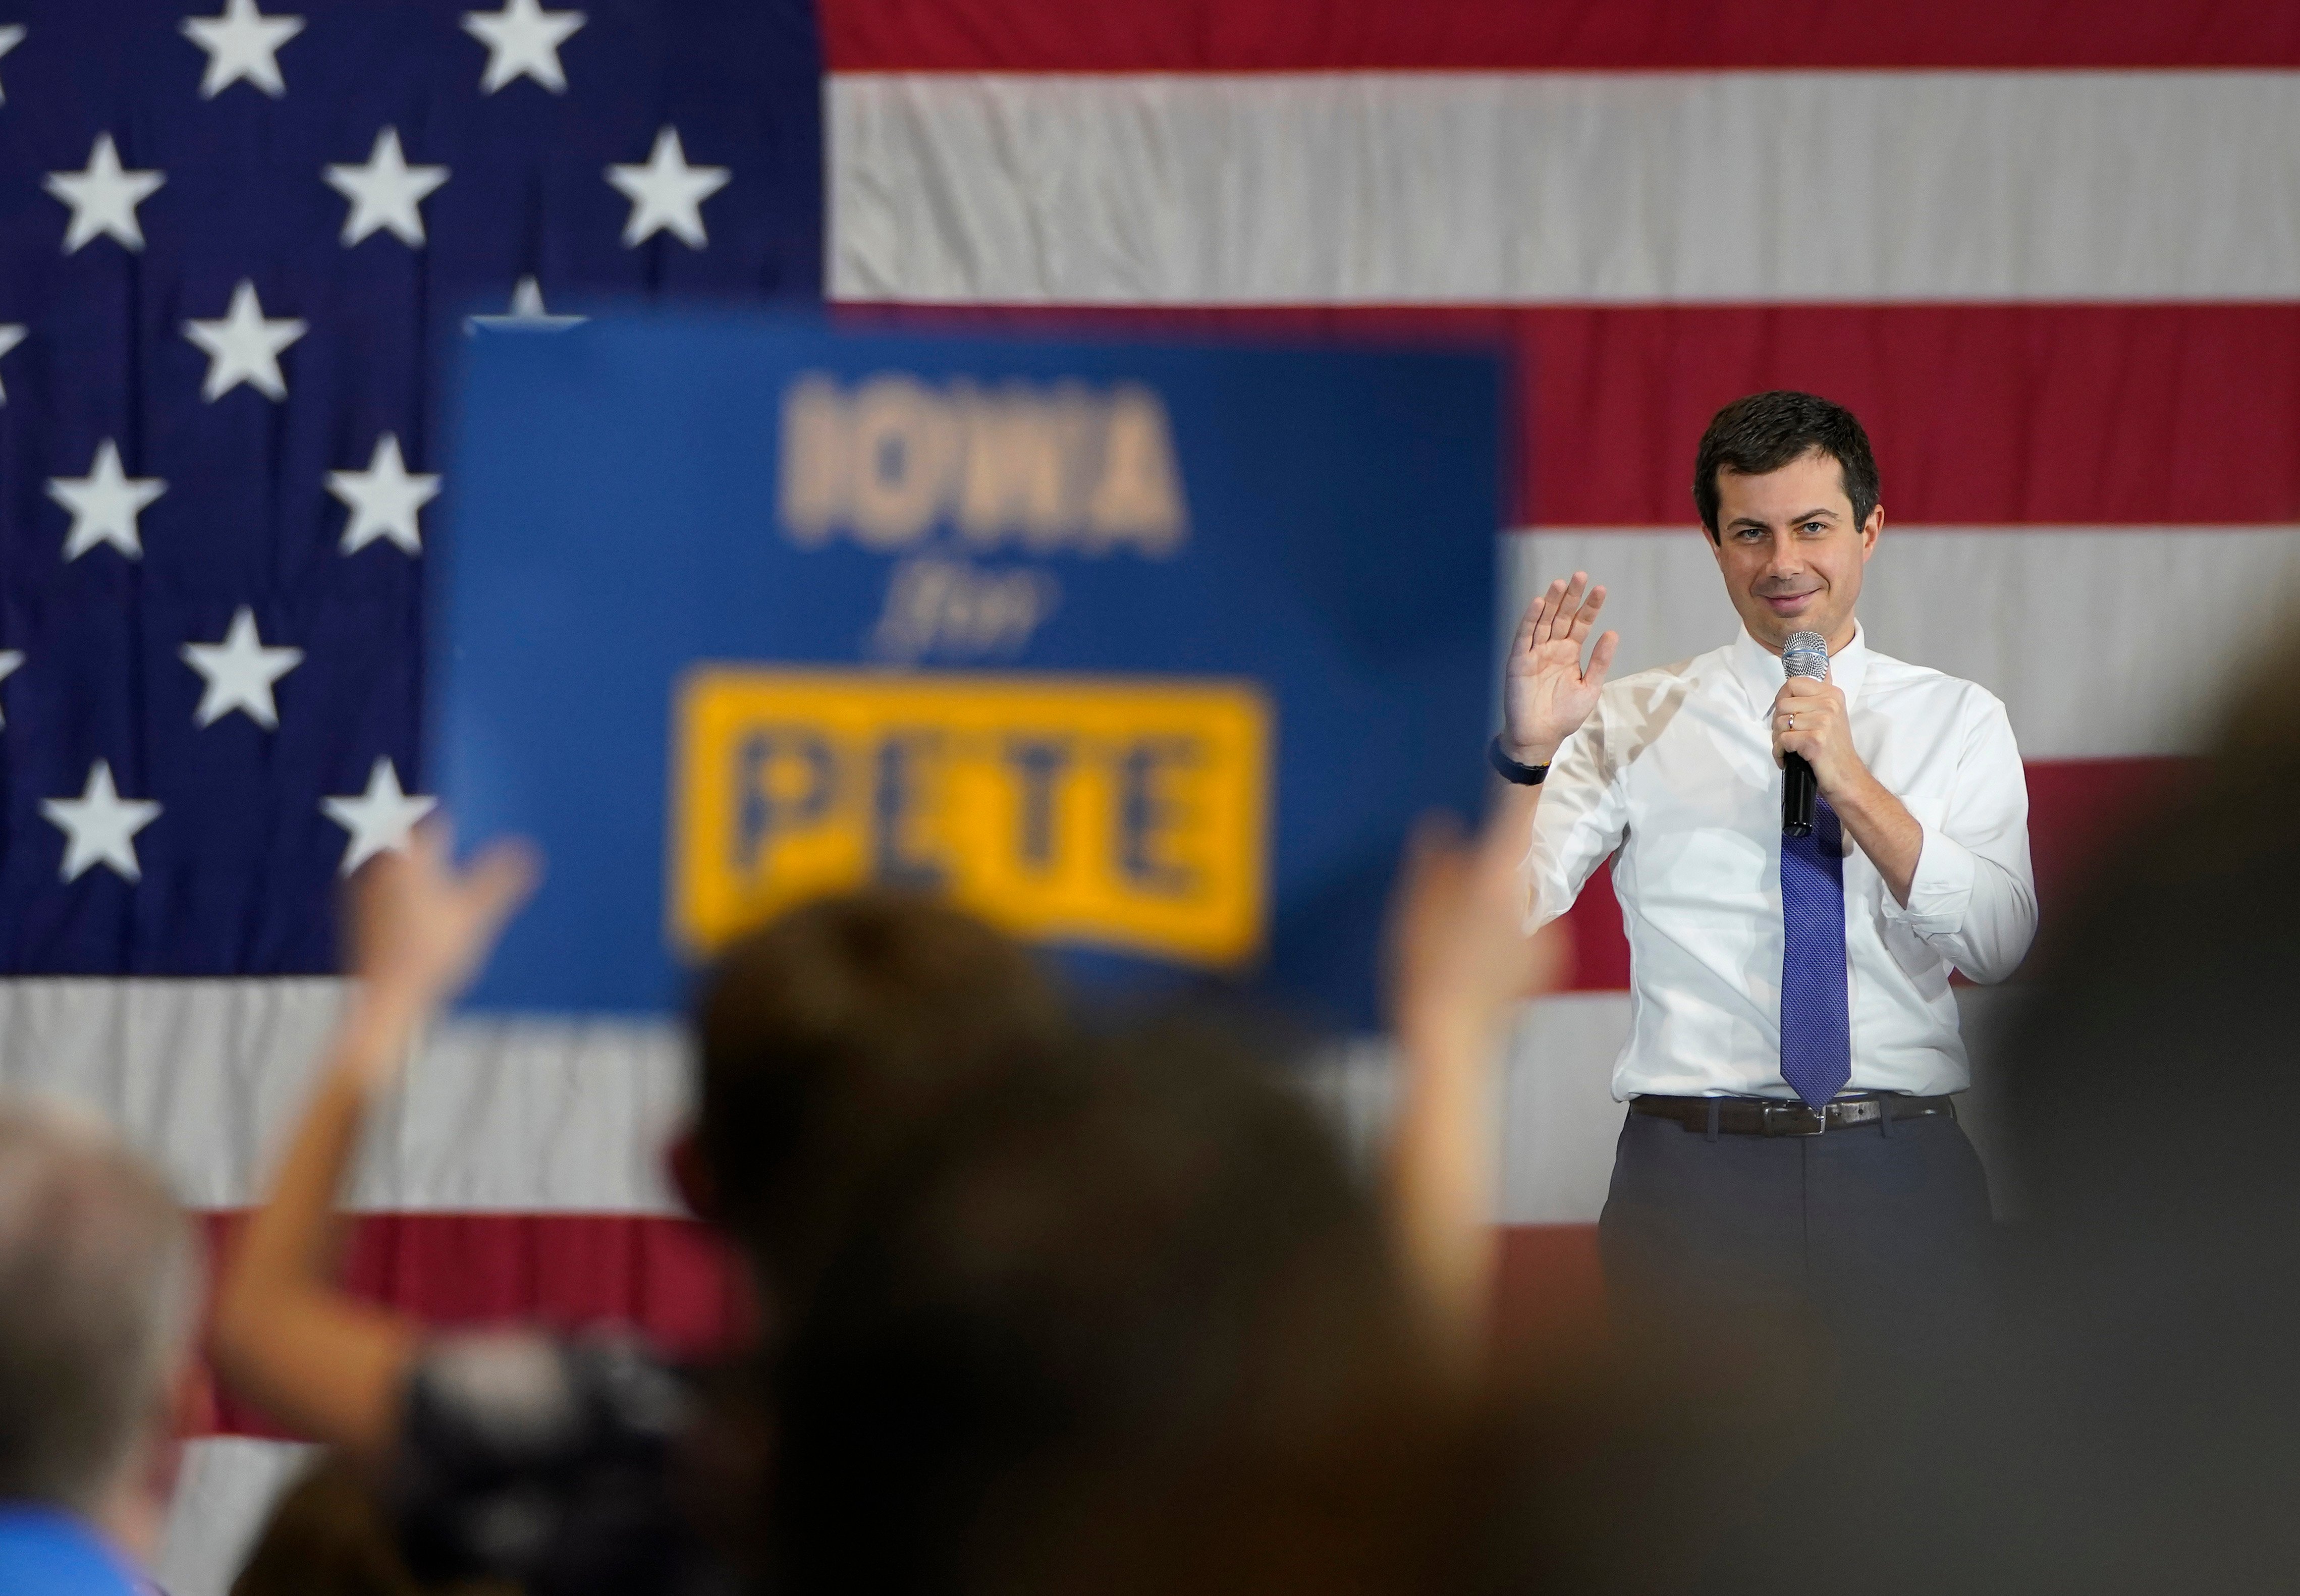 CORALVILLE, IOWA - DECEMBER 08: Democratic presidential candidate South Bend, Indiana Mayor Pete Buttigieg speaks to Iowa voters at a campaign event December 08, 2019 in Coralville, Iowa. Less than two months remain before Iowa holds its caucuses in the nation's first contest in the 2020 presidential election. (Photo by Win McNamee/Getty Images)